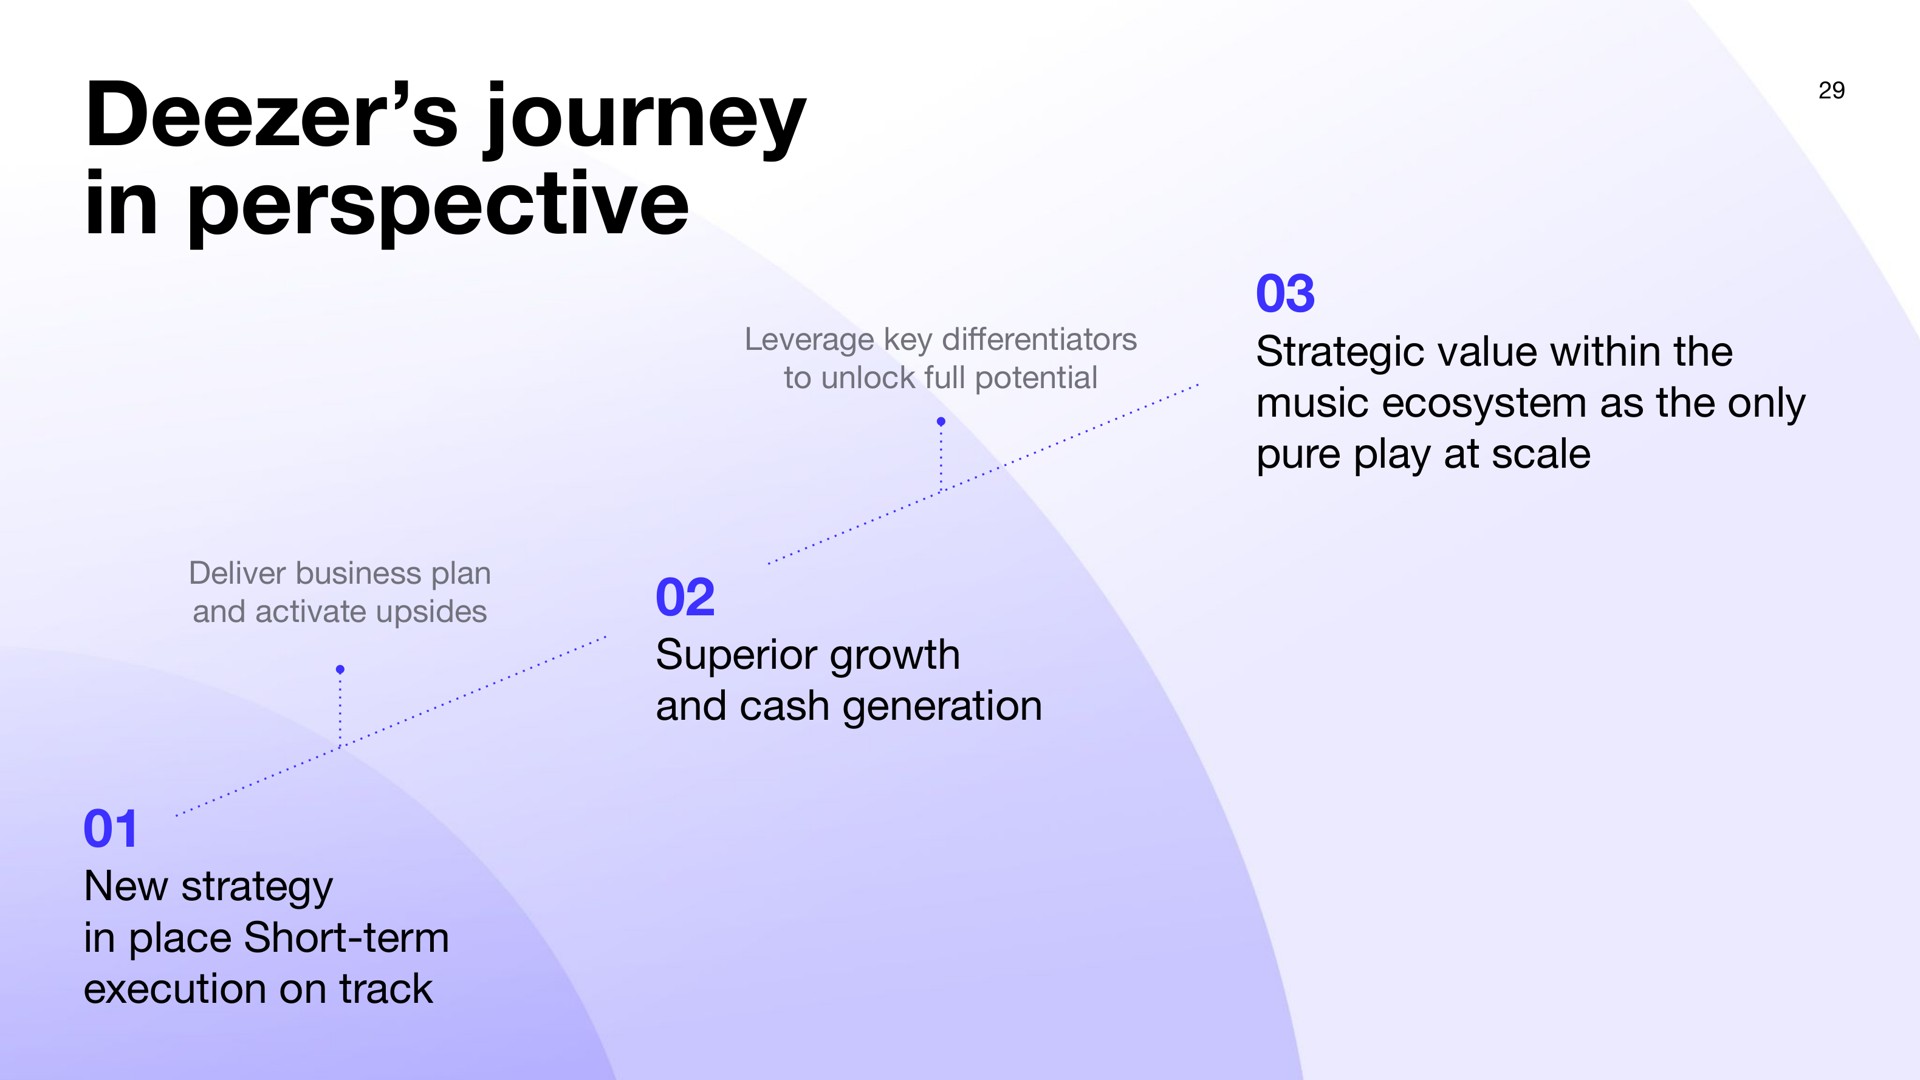 copyright global brand studio brand journey in perspective leverage key to unlock full potential strategic value within the music ecosystem as the only pure play at scale deliver business plan and activate upsides superior growth and cash generation new strategy in place short term execution on track | Deezer